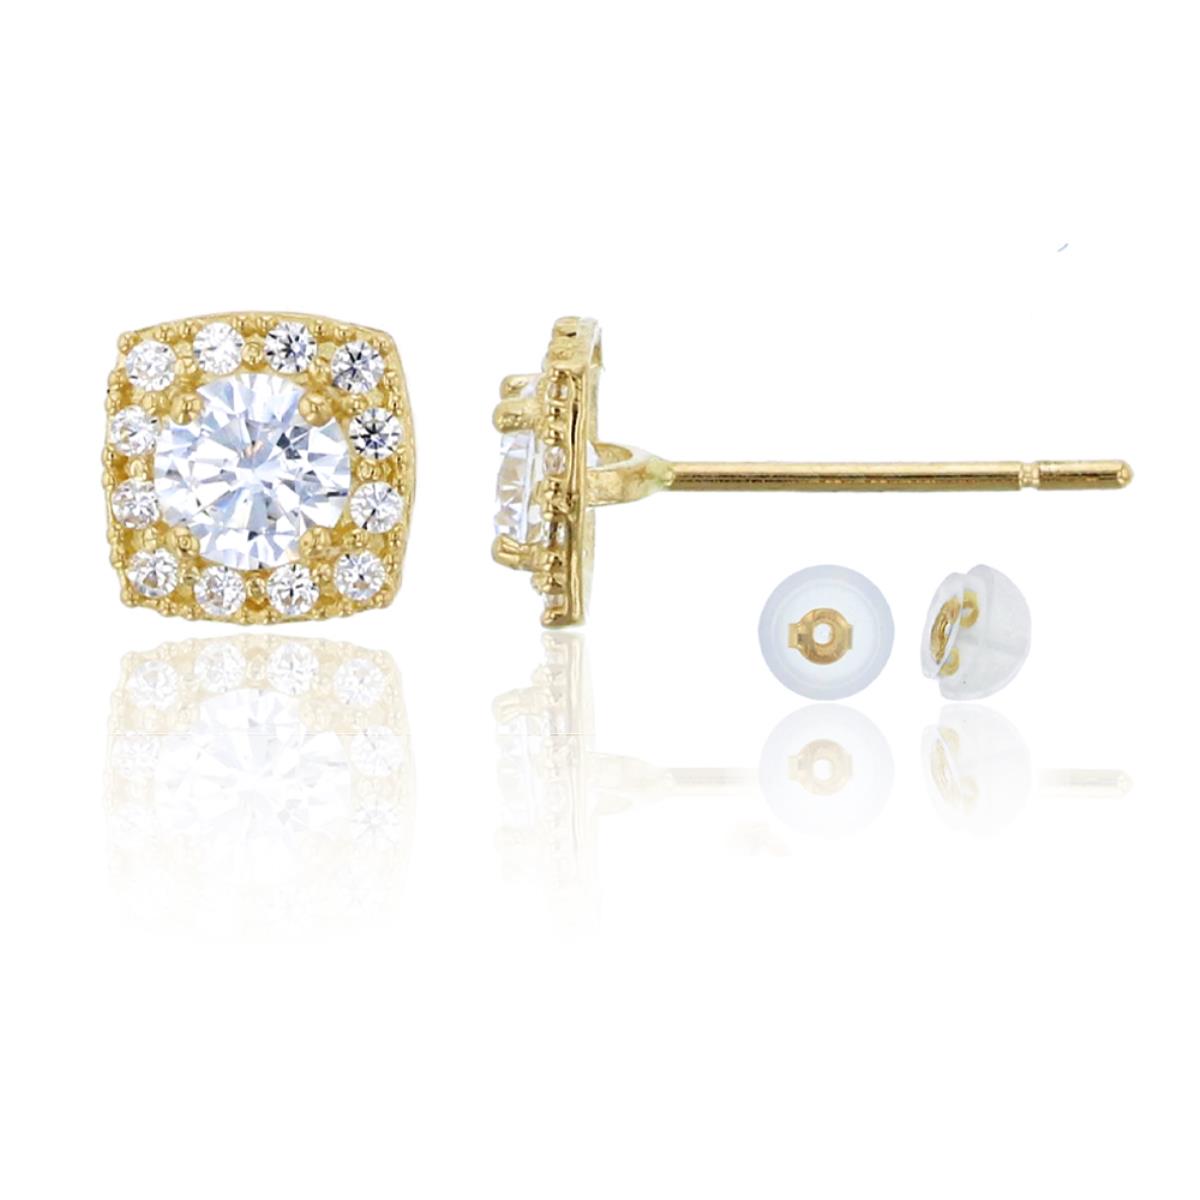 14K Yellow Gold 3.75mm Round Cut Square Shapped Halo Stud & 14K Silicone Back